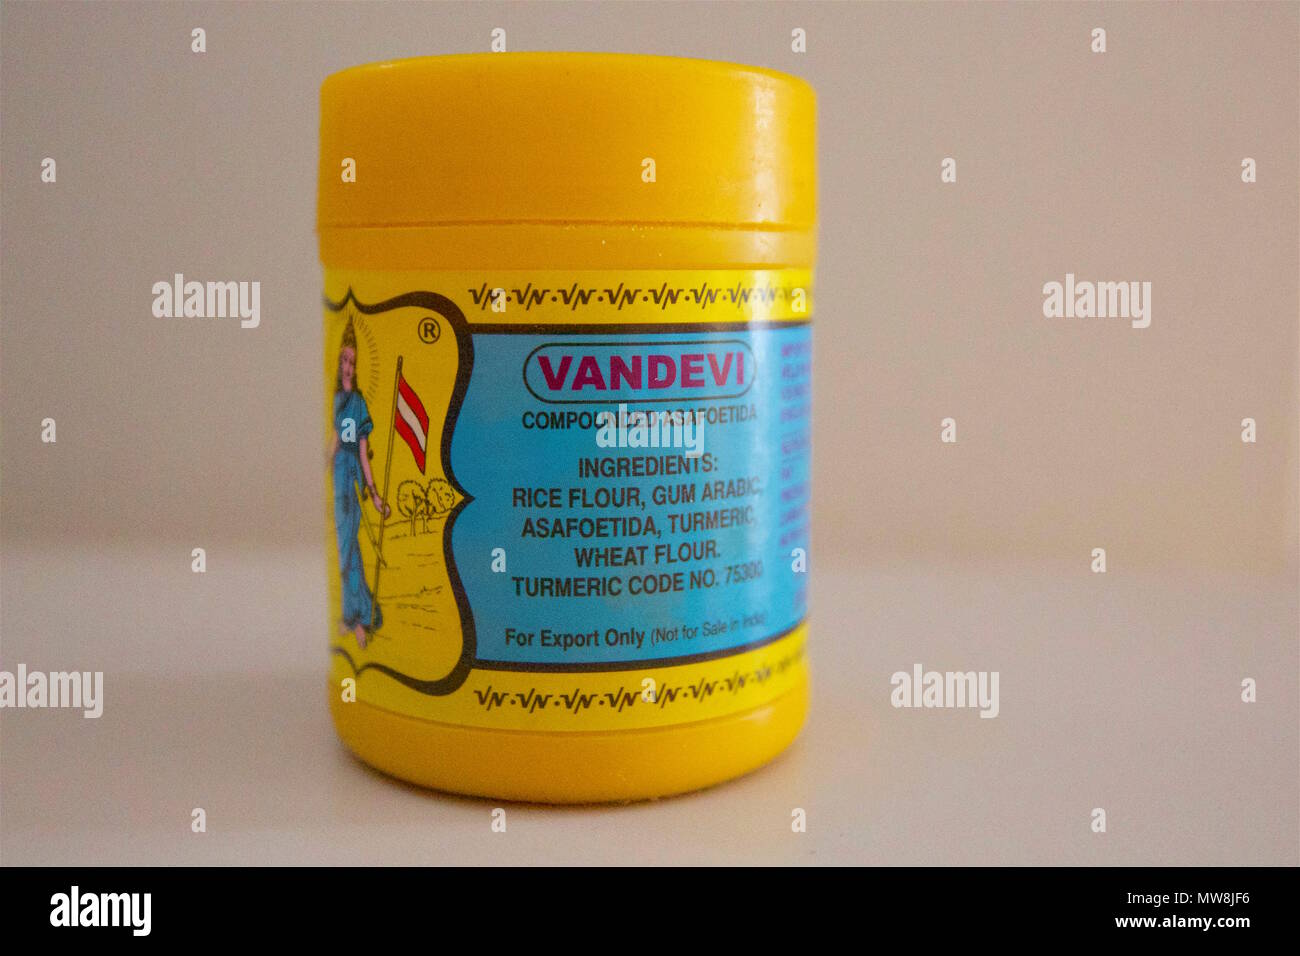 Vandevi Hing or Compounded Asafoetida, which is a pungent spice used in Indian cooking Stock Photo